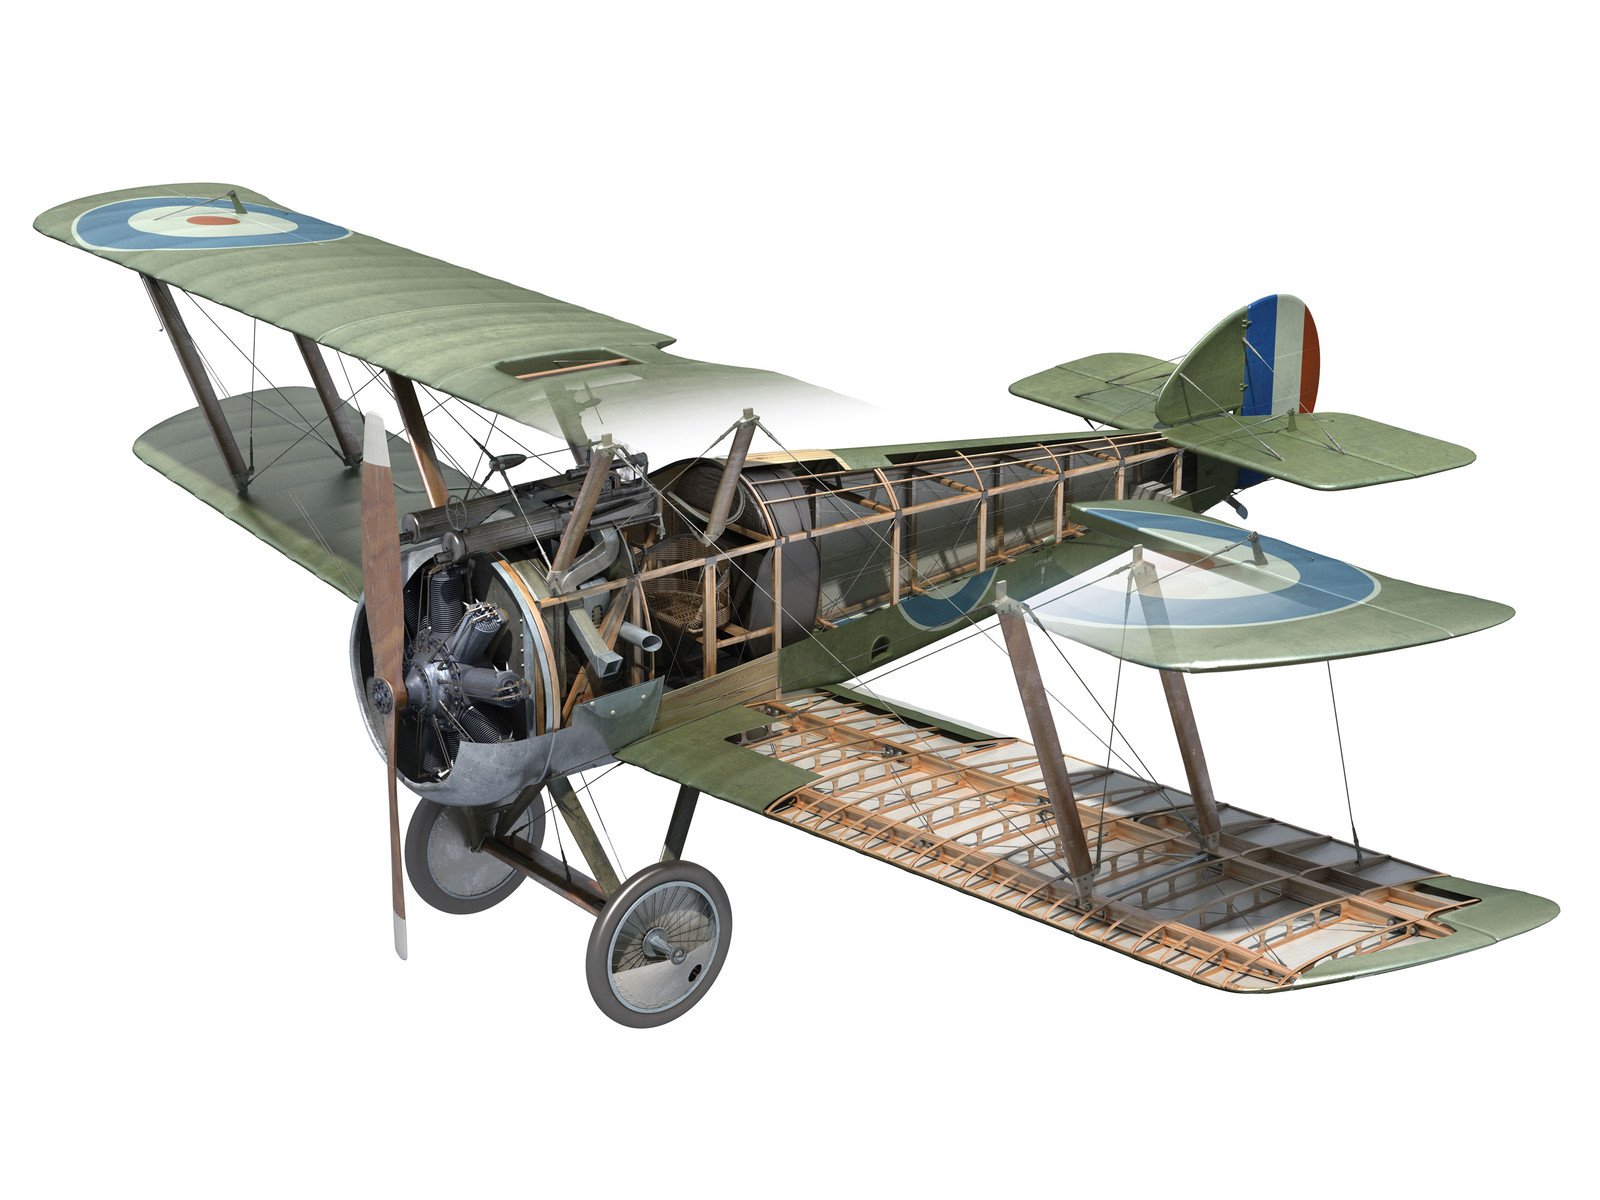 The Sopwith Camel WW1 Aircraft. Completed in 4 days using 3D Studio Max, rendered in V-Ray 3